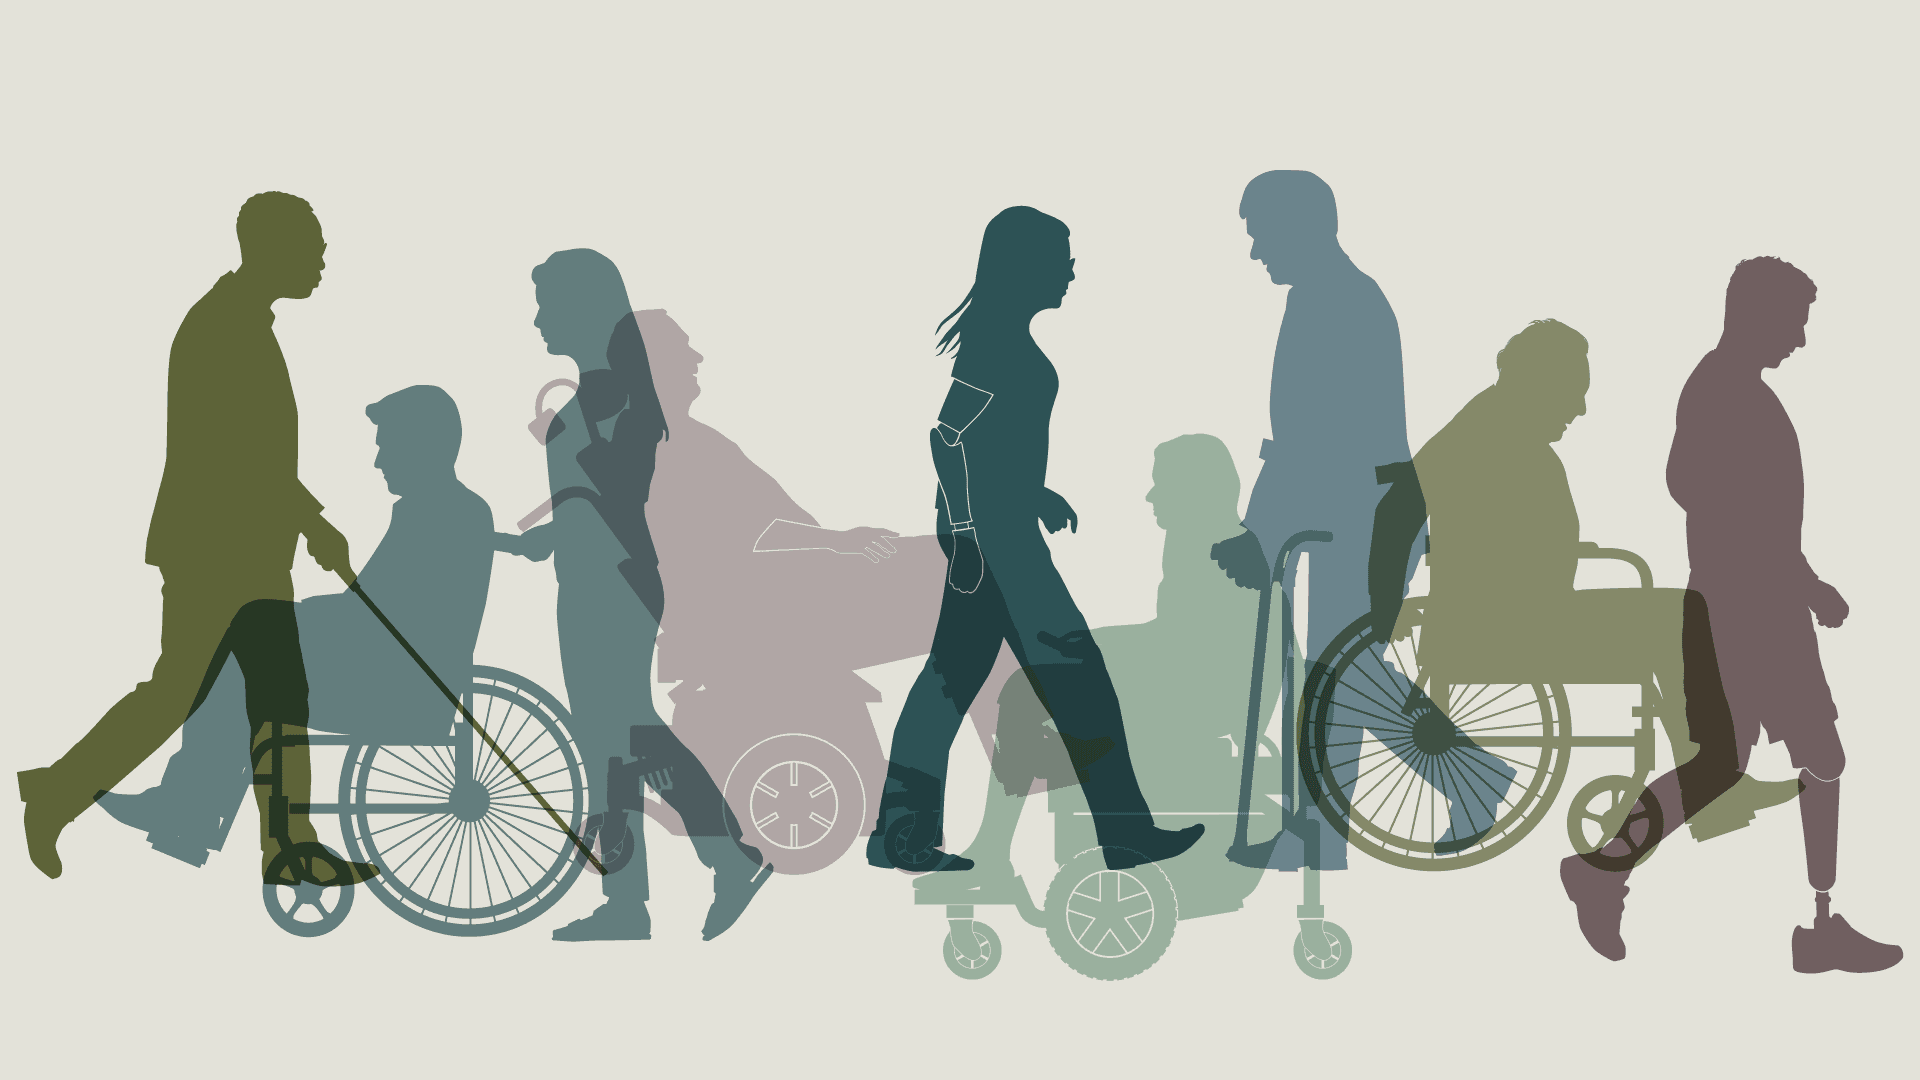 Silhouettes of people walking with canes, in wheelchairs, with prosthetics